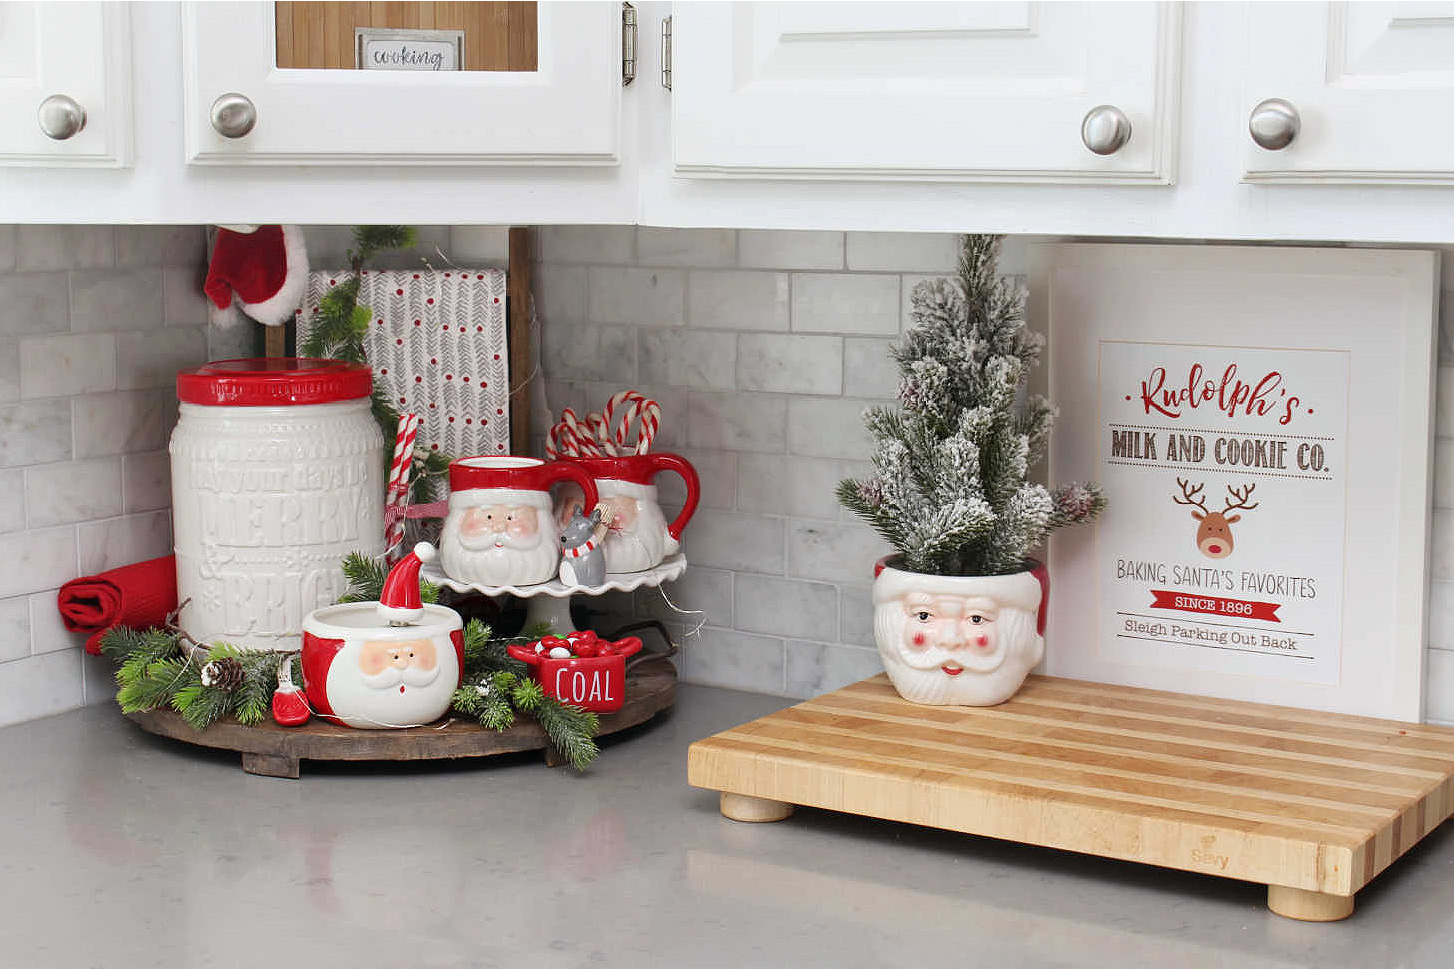 Red and white Christmas kitchen decor with Santa mugs.